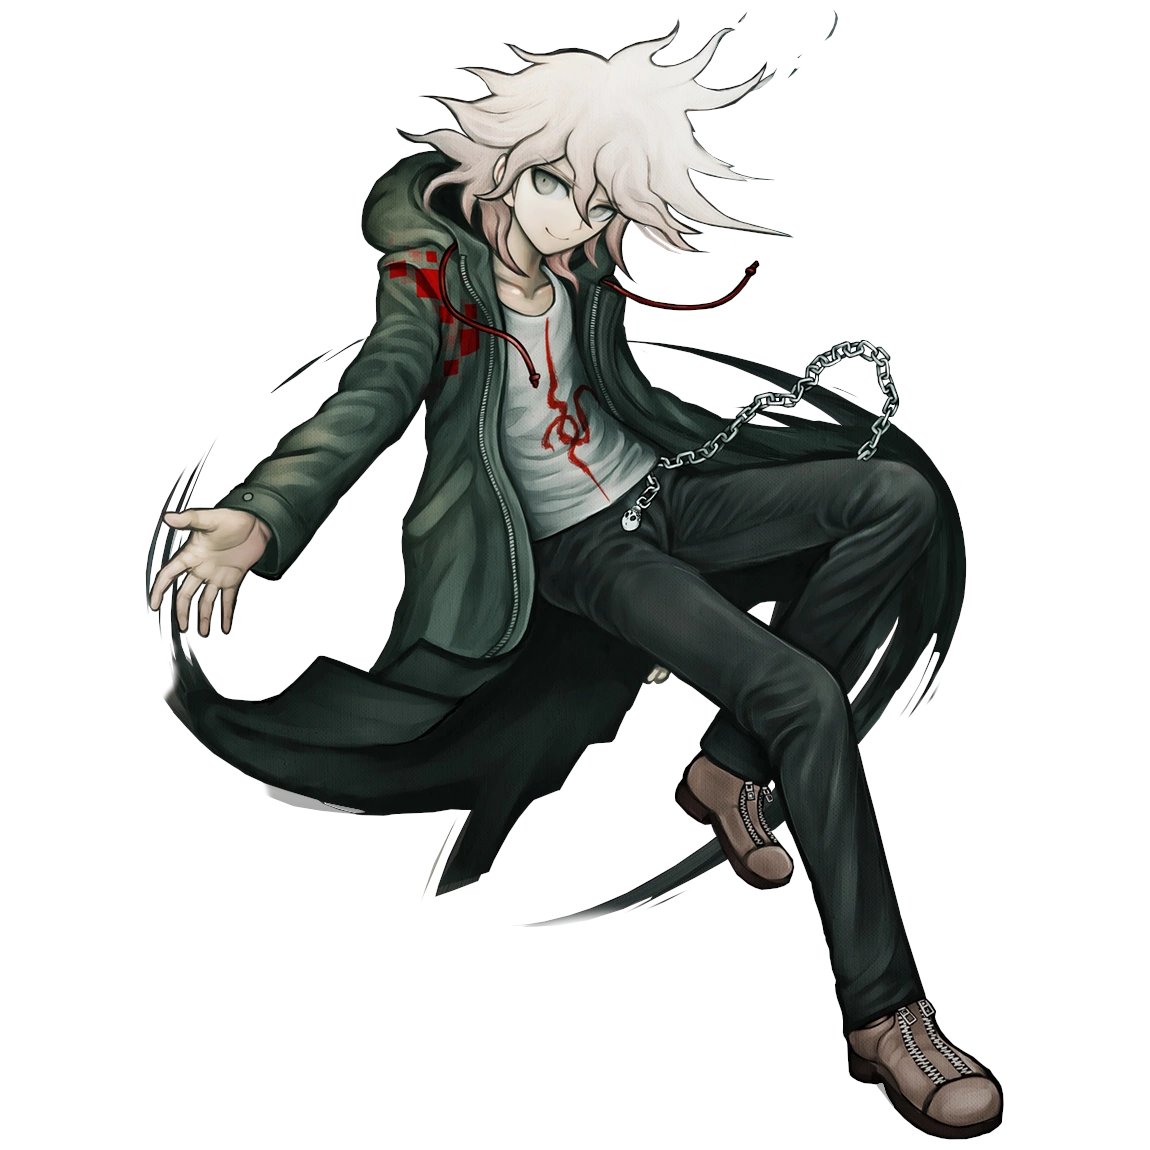 heres the one thats gonna get me blocked and yelled at: komaeda plays arcana force